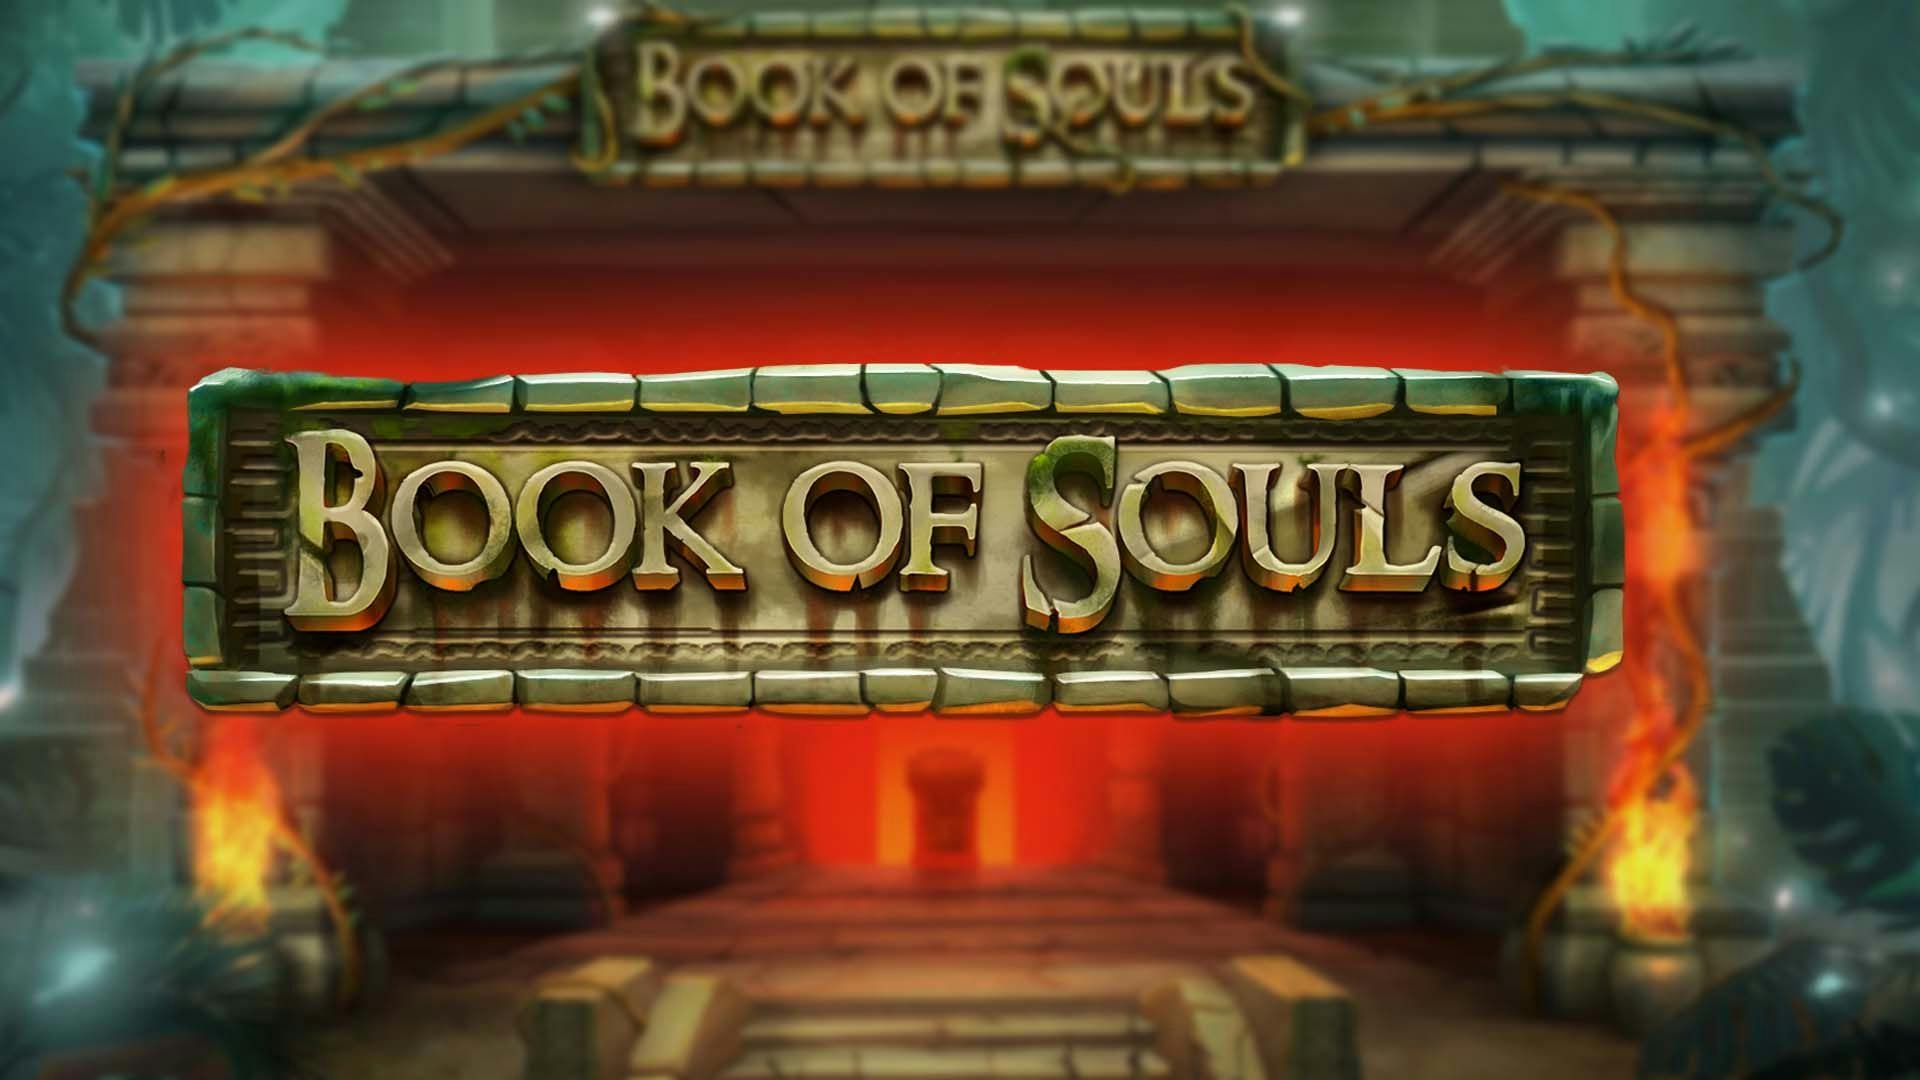 Book Of Souls Slot Machine Online Free Game Play